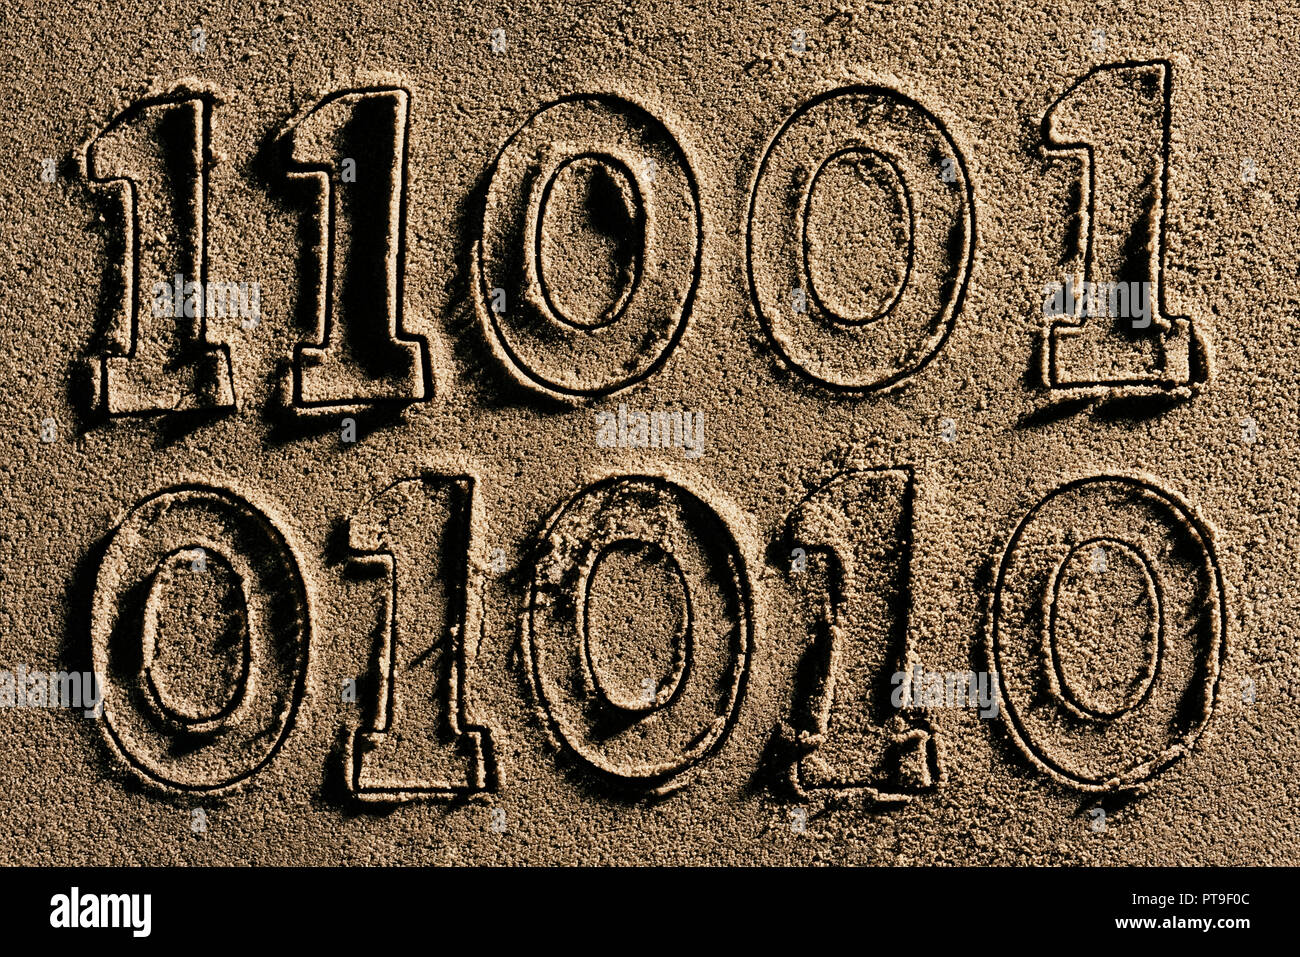 A series of binary ones and zeros numbers  cut into wet sand. Stock Photo